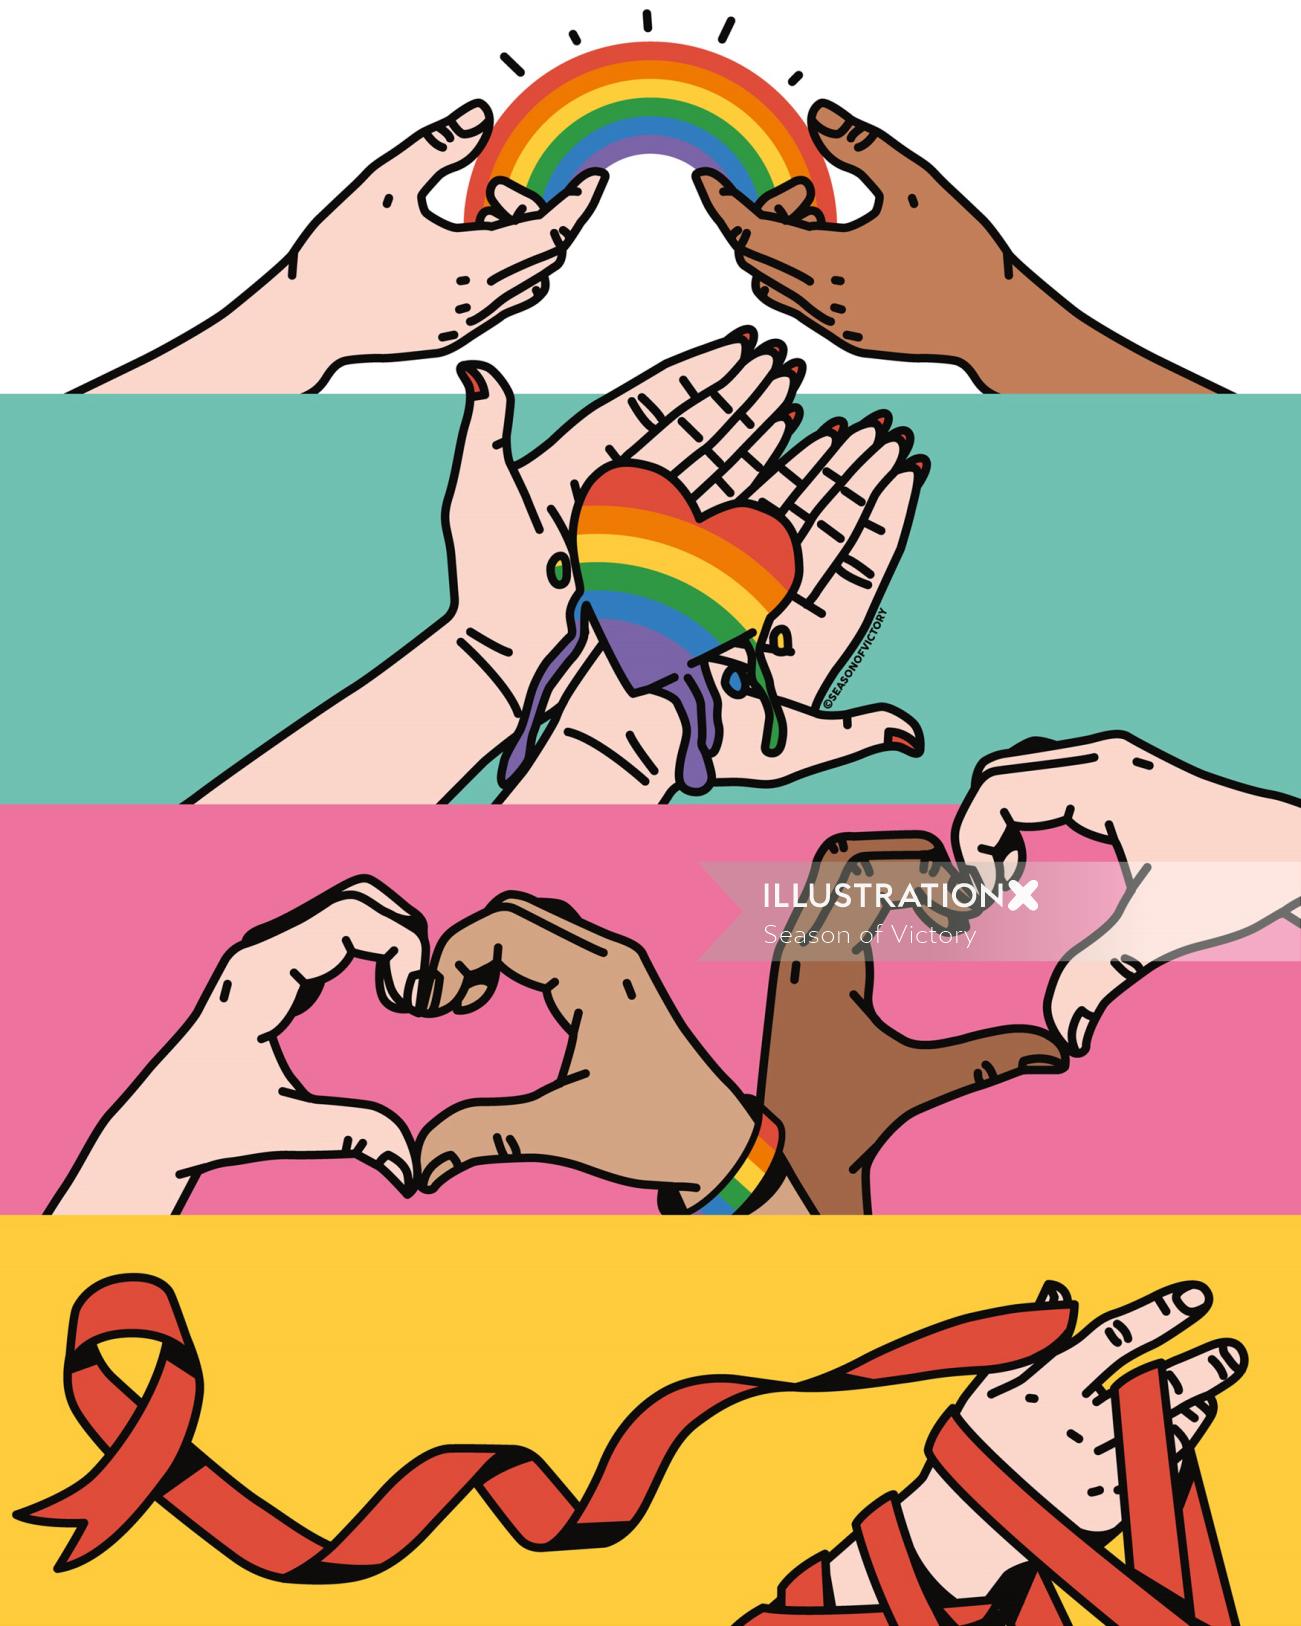 "Have Pride" book cover with brightly coloured hands